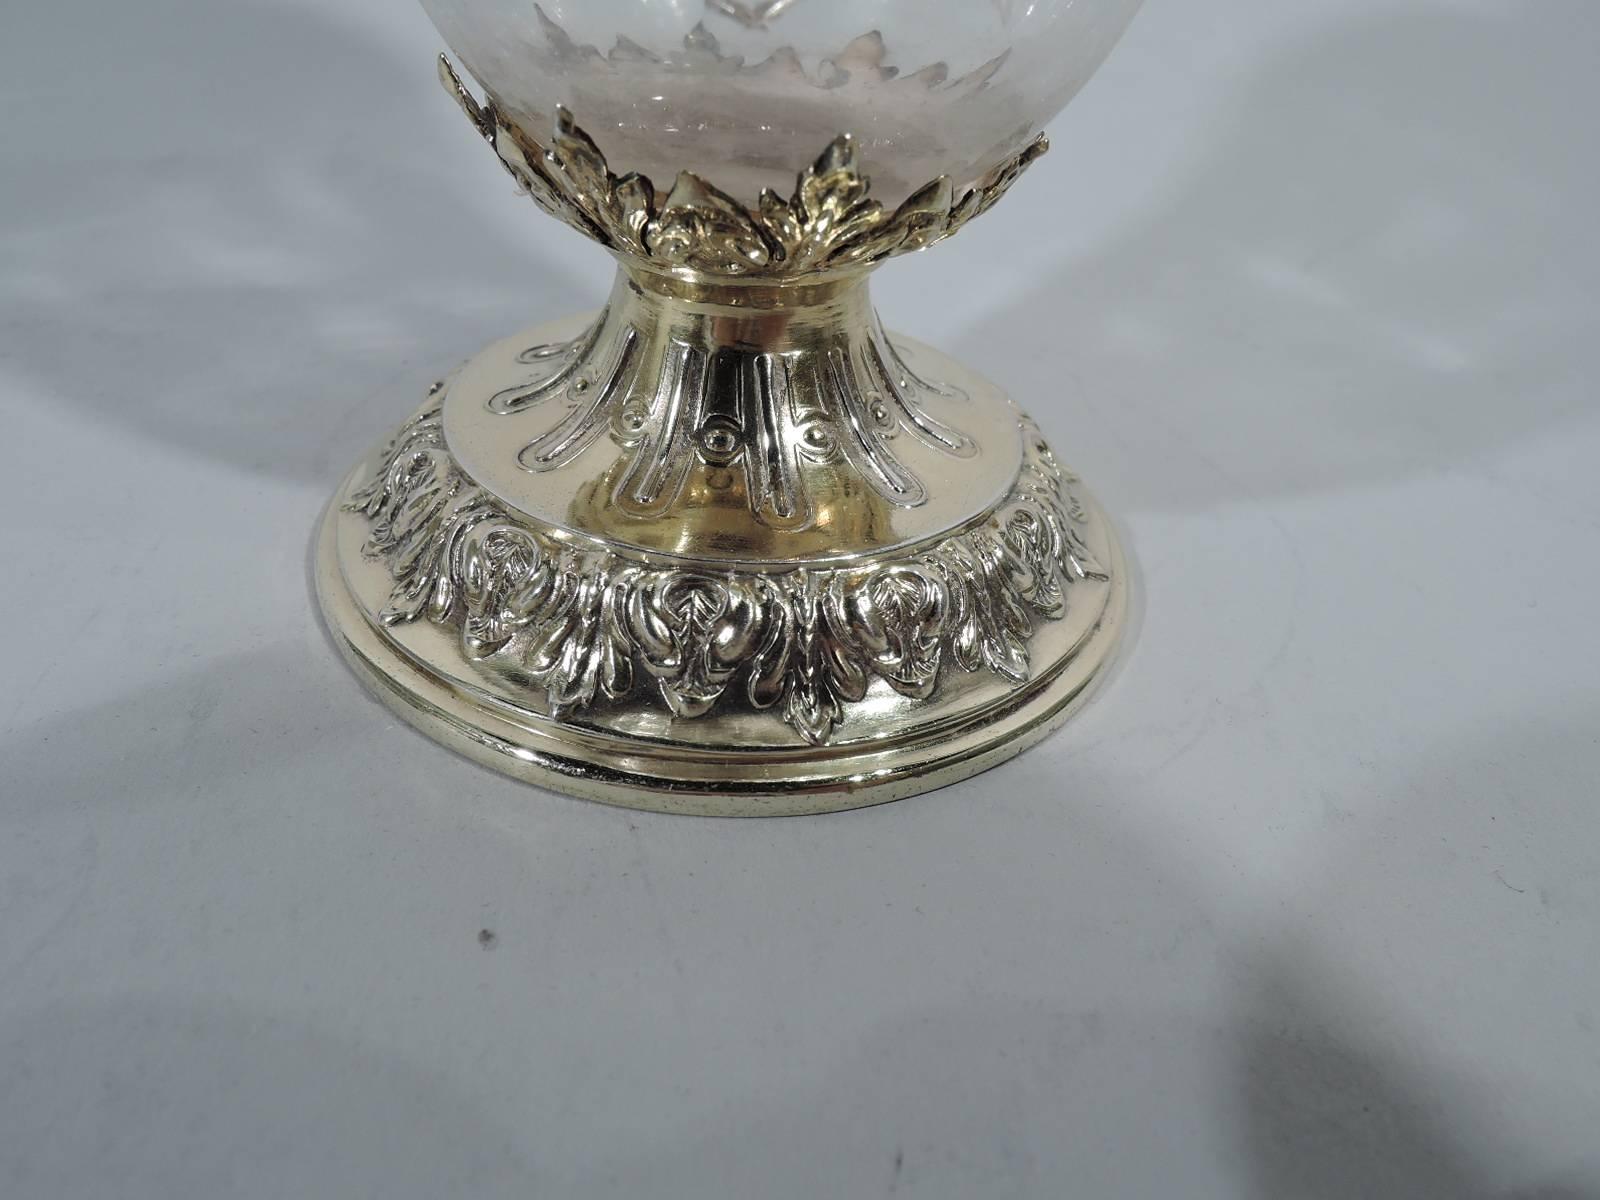 Antique American Gilt Sterling Silver and Crystal Sugar Shaker 1